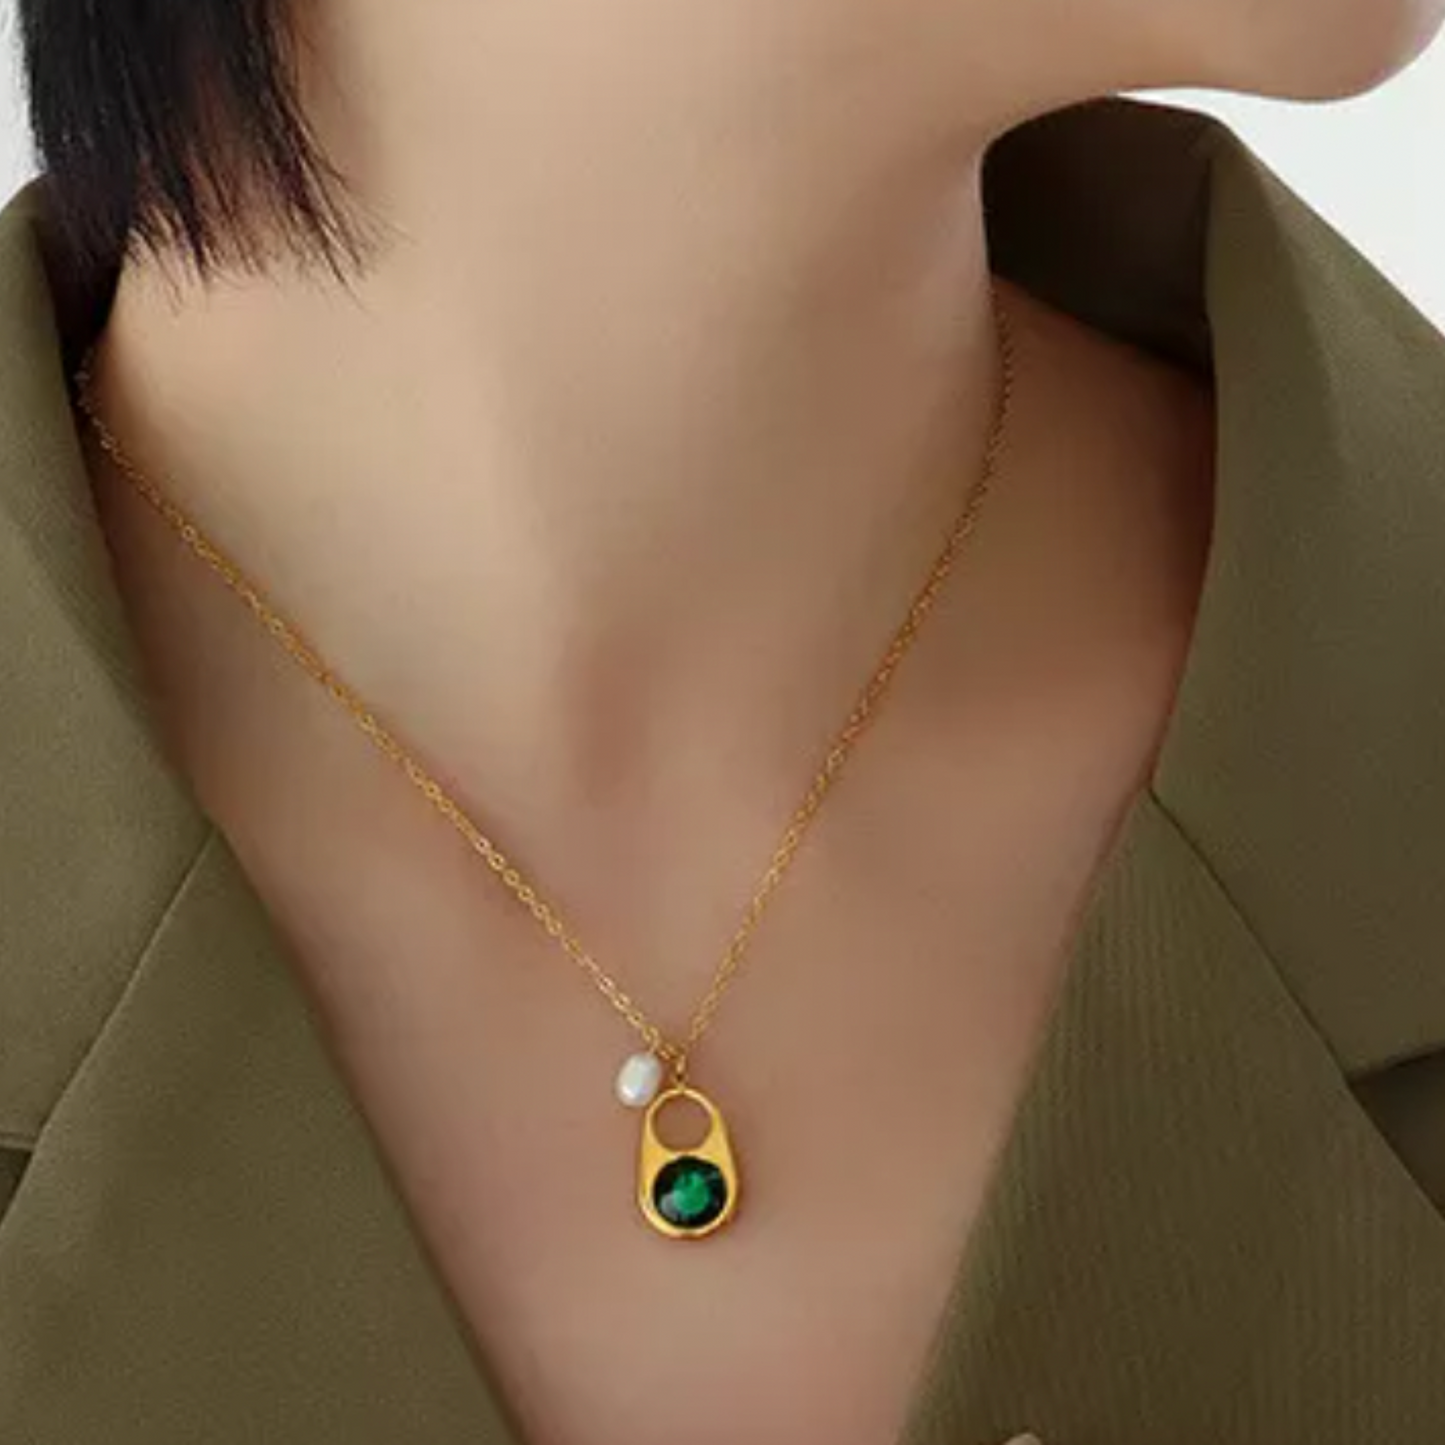 Classic Charm Lock Pendant Necklace 18K Gold Plated Stainless Steel Non Faded. The accent pearl give it that luxury look.